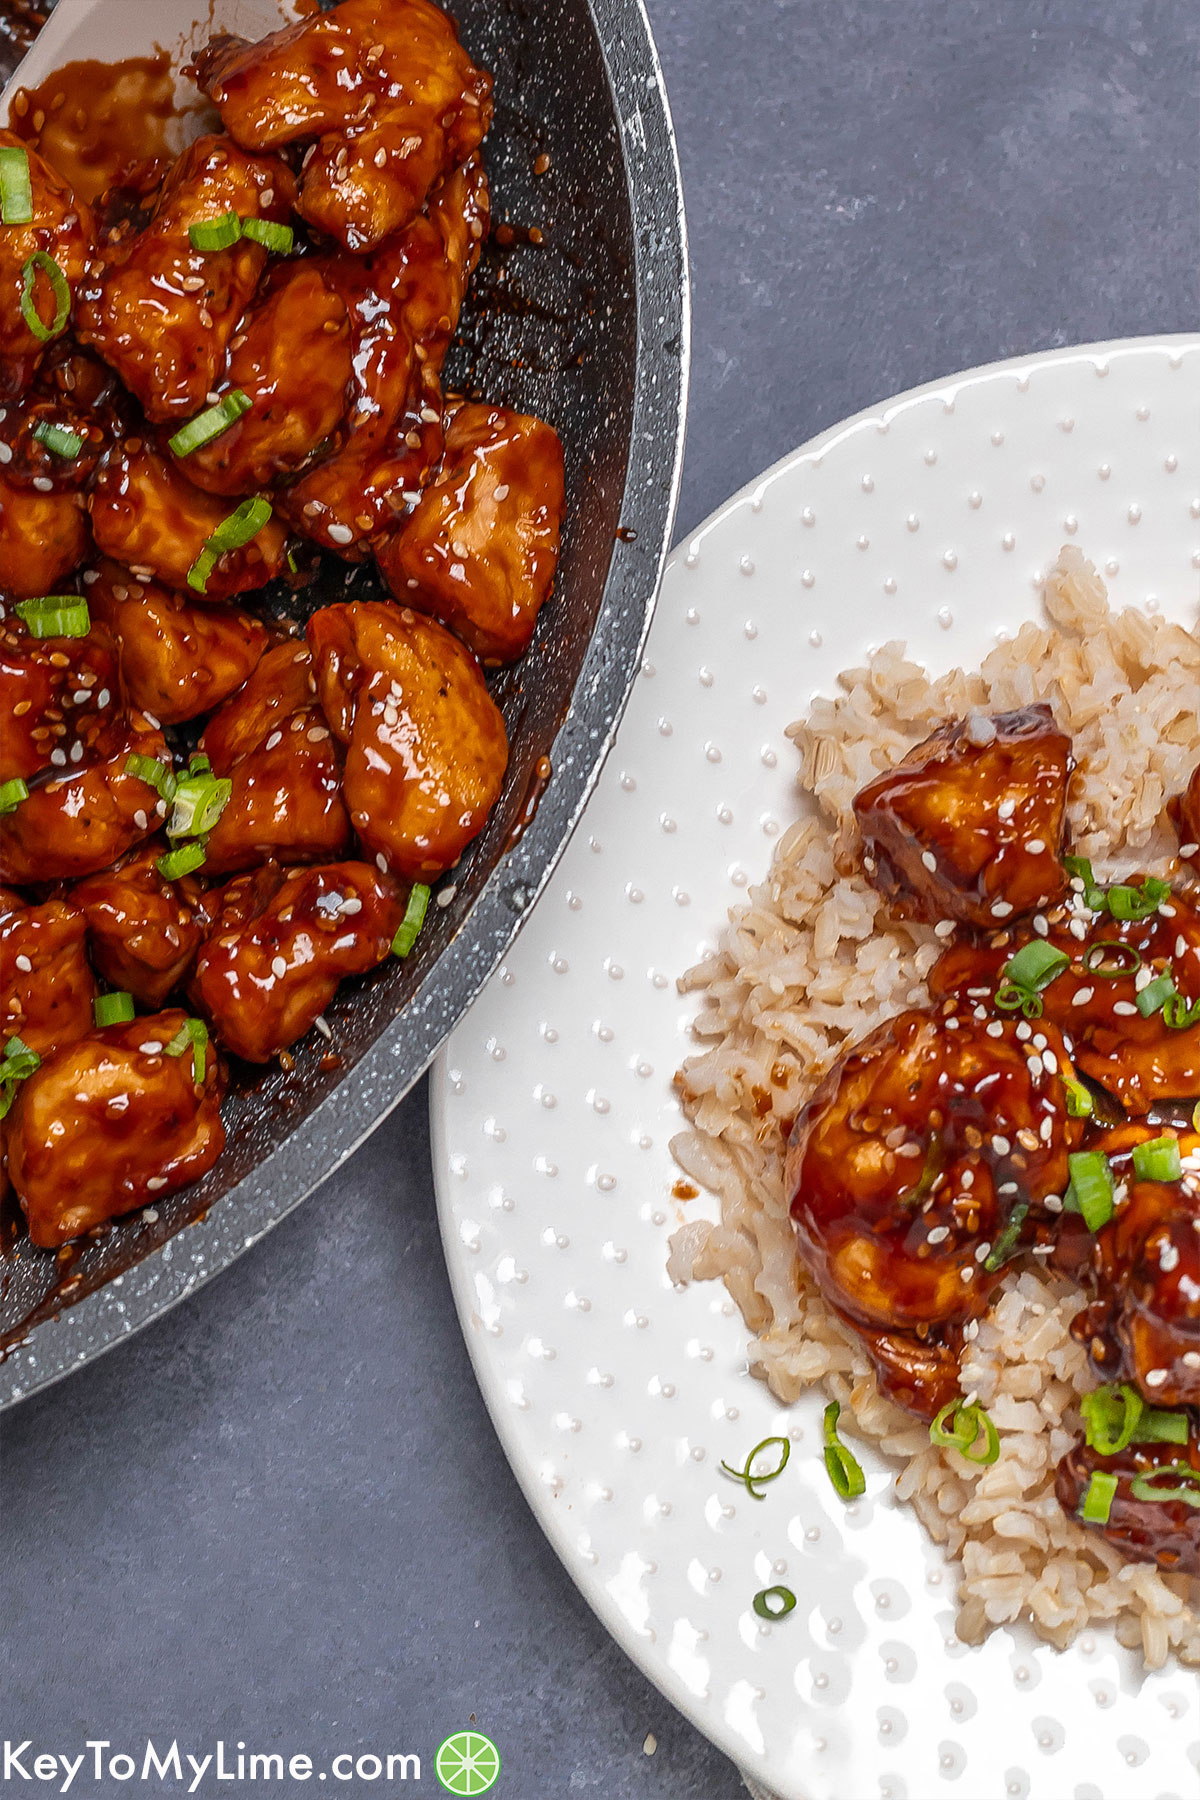 A partial pan and plate full of garnished honey sesame chicken.